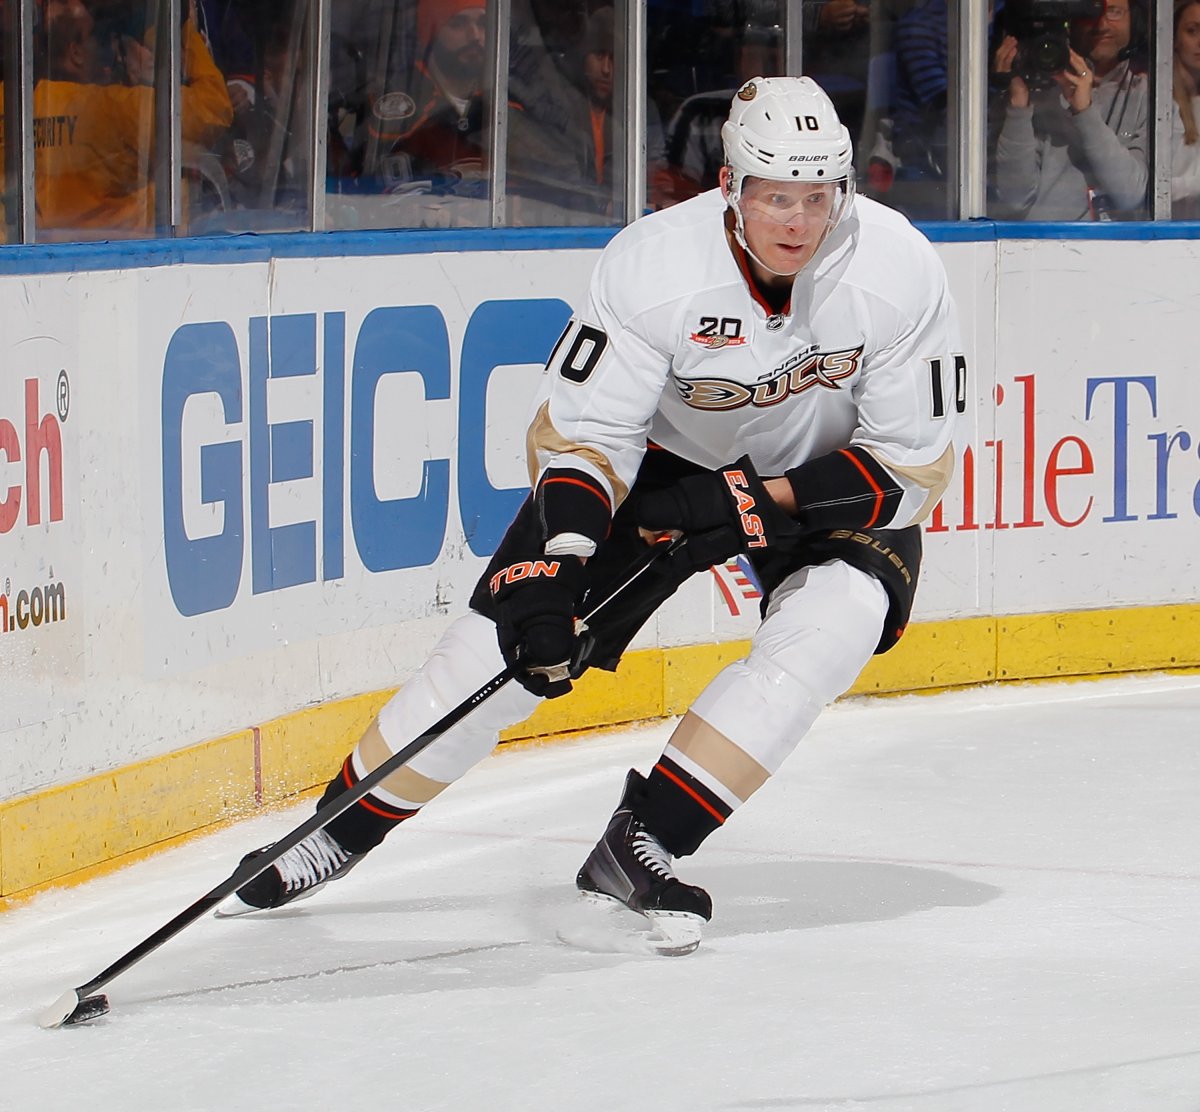 Corey Perry #10 of the Anaheim Ducks. (Paul Bereswill/Getty Images).